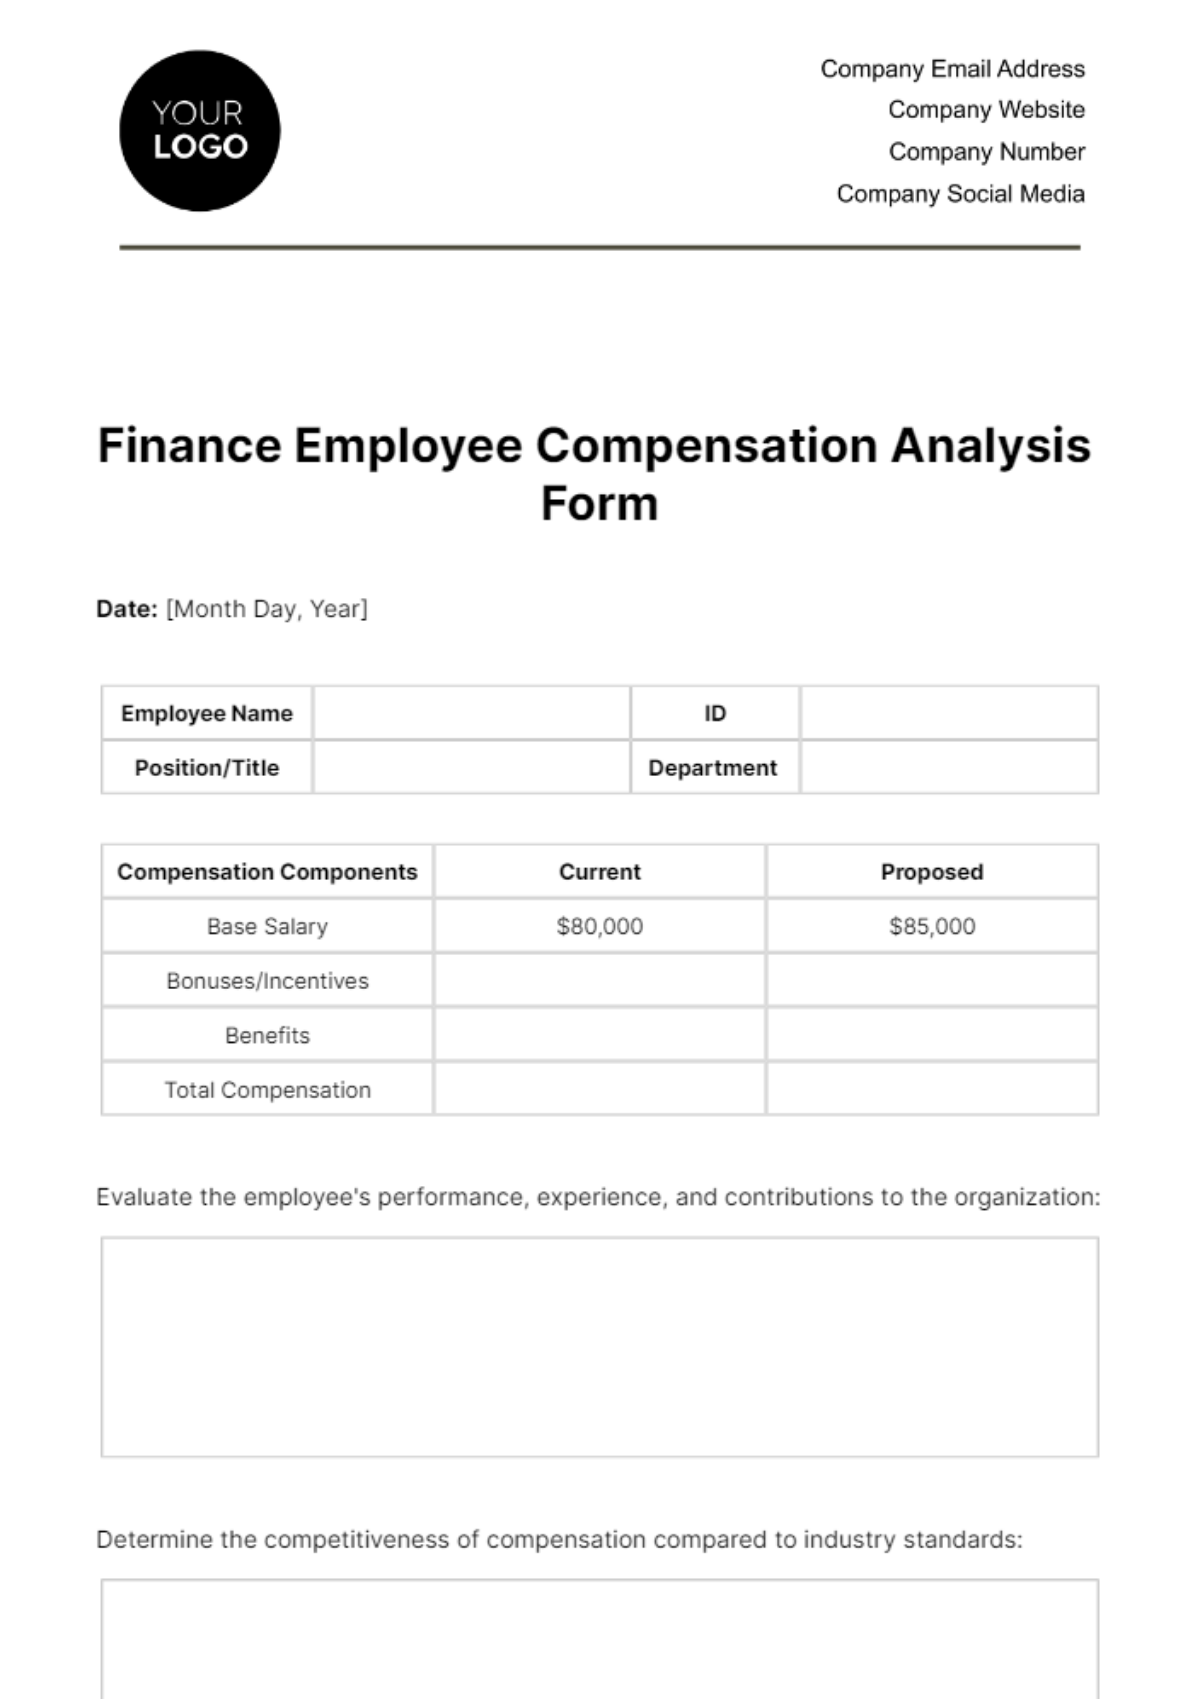 Finance Employee Compensation Analysis Form Template